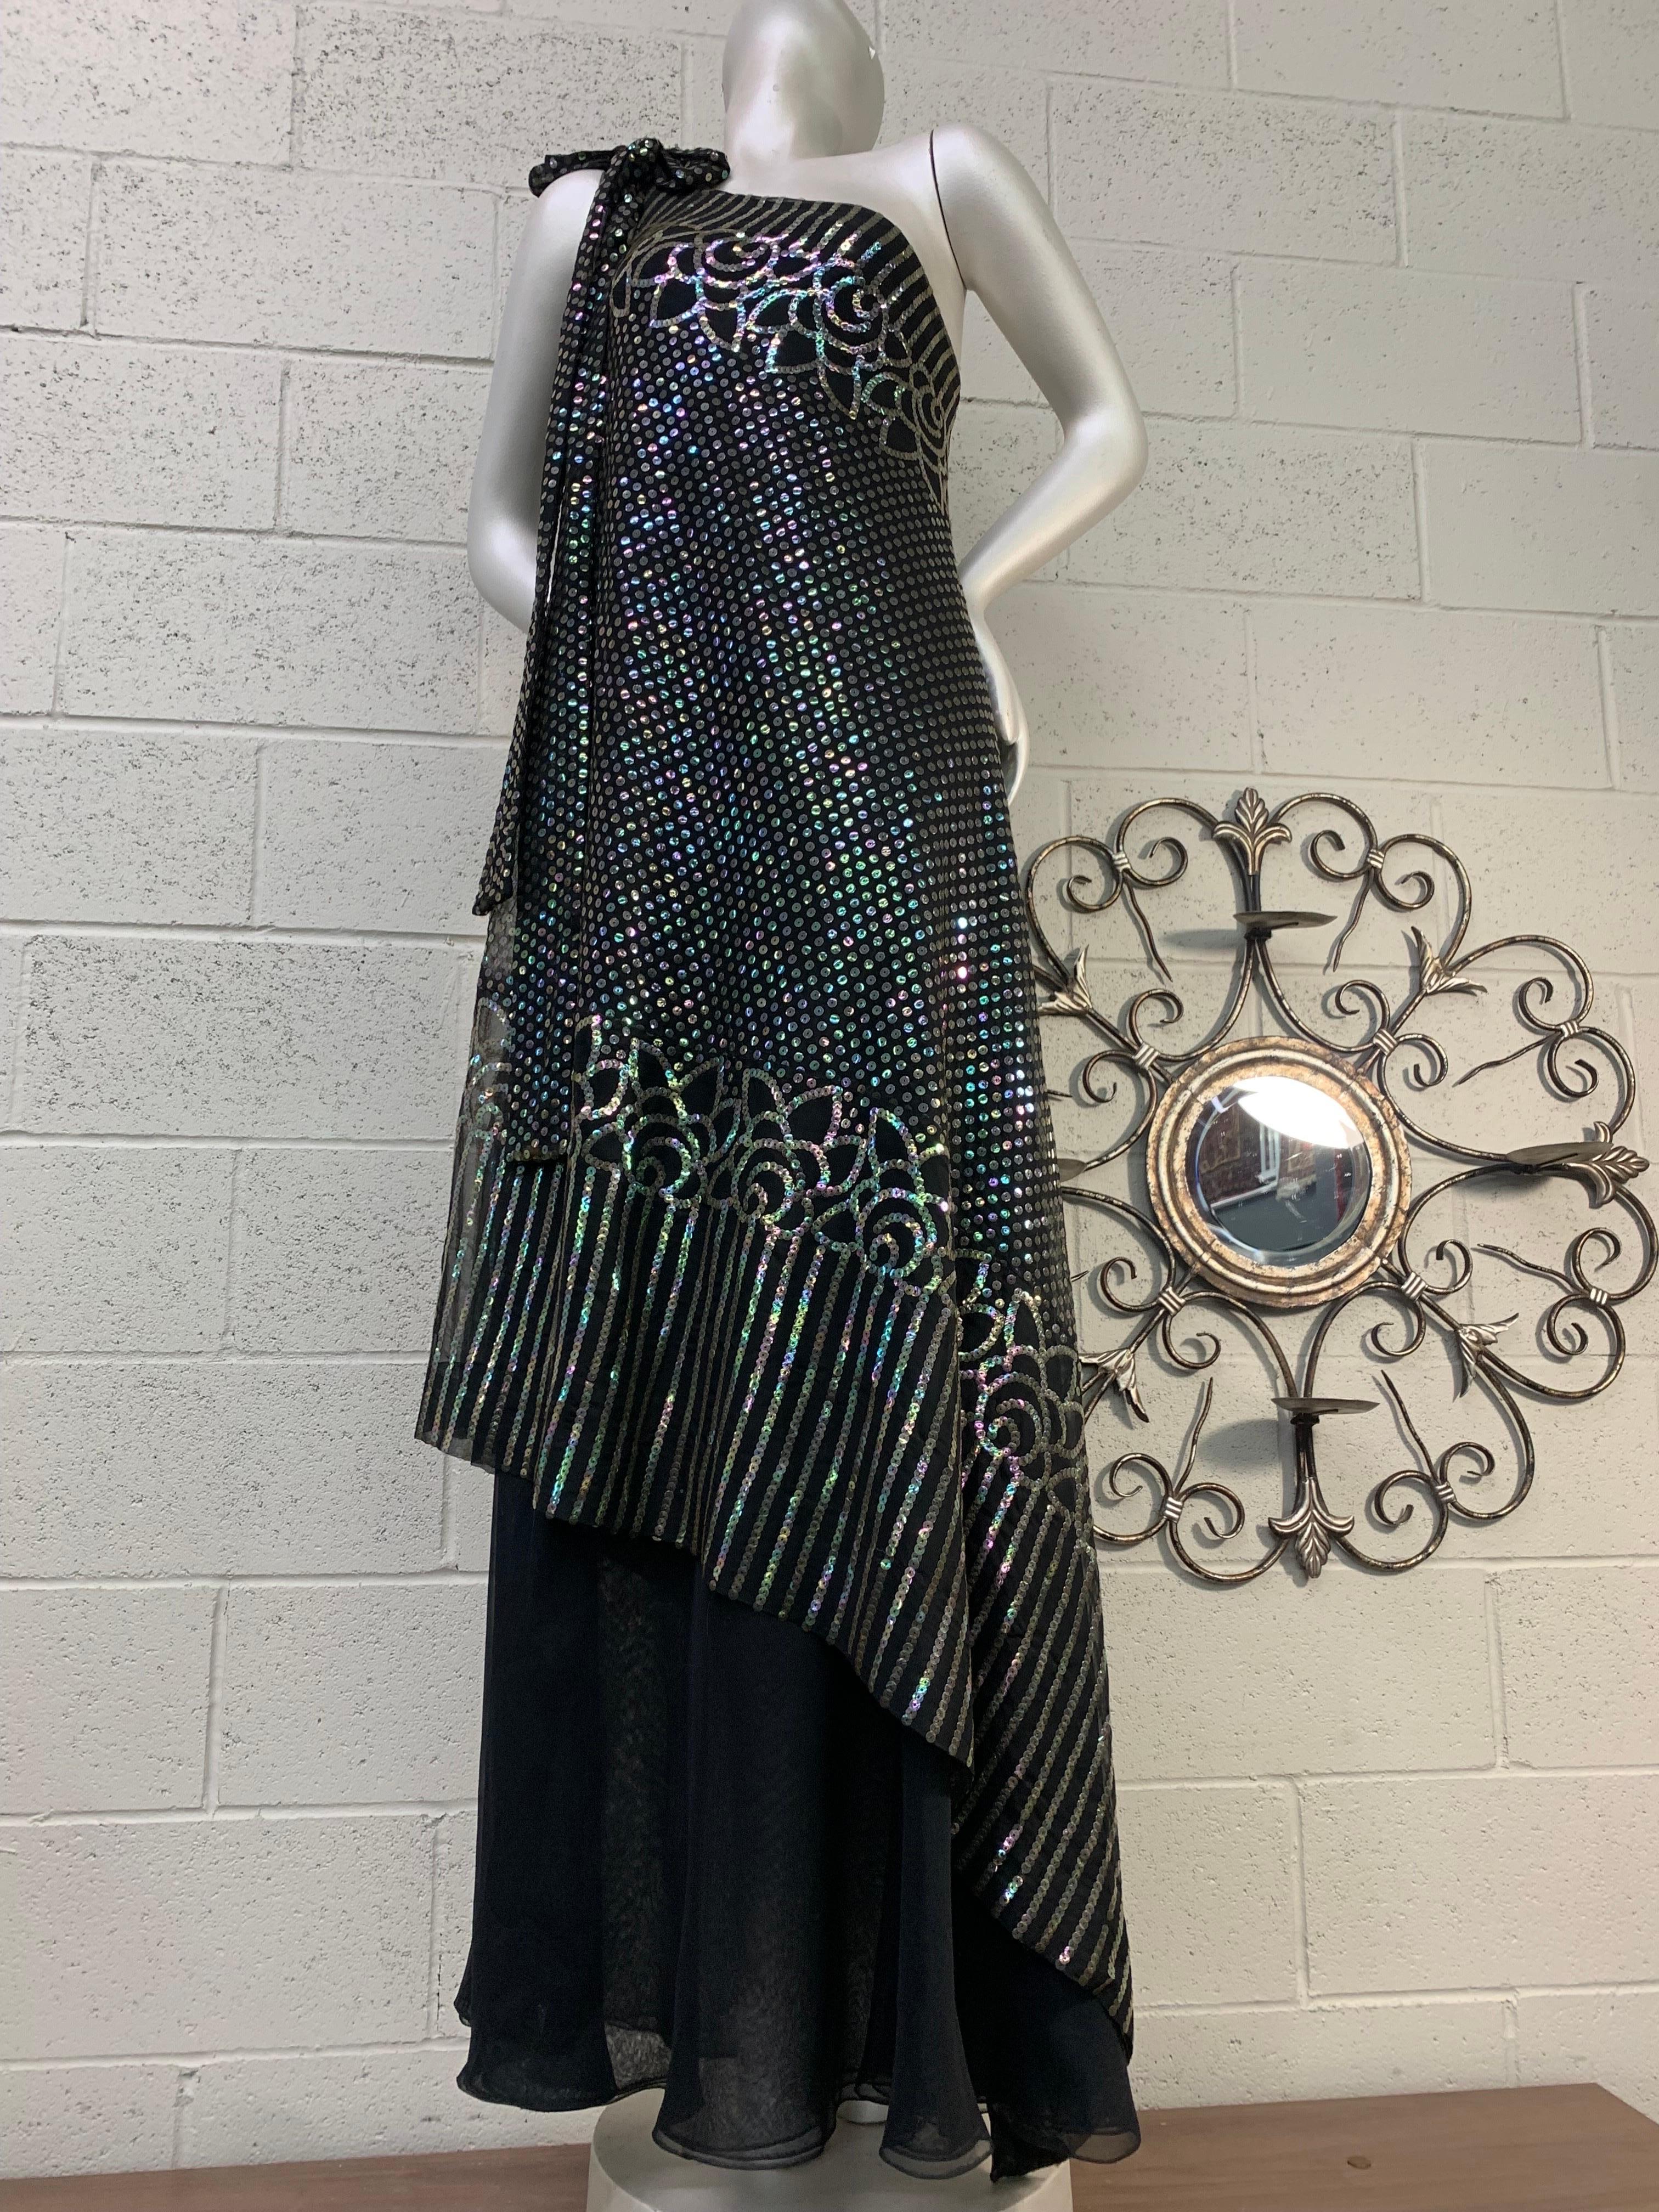 1970 Ruben Panis Black Chiffon Hologram Sequin Art Deco Styled One-Shoulder Gown For Sale 1